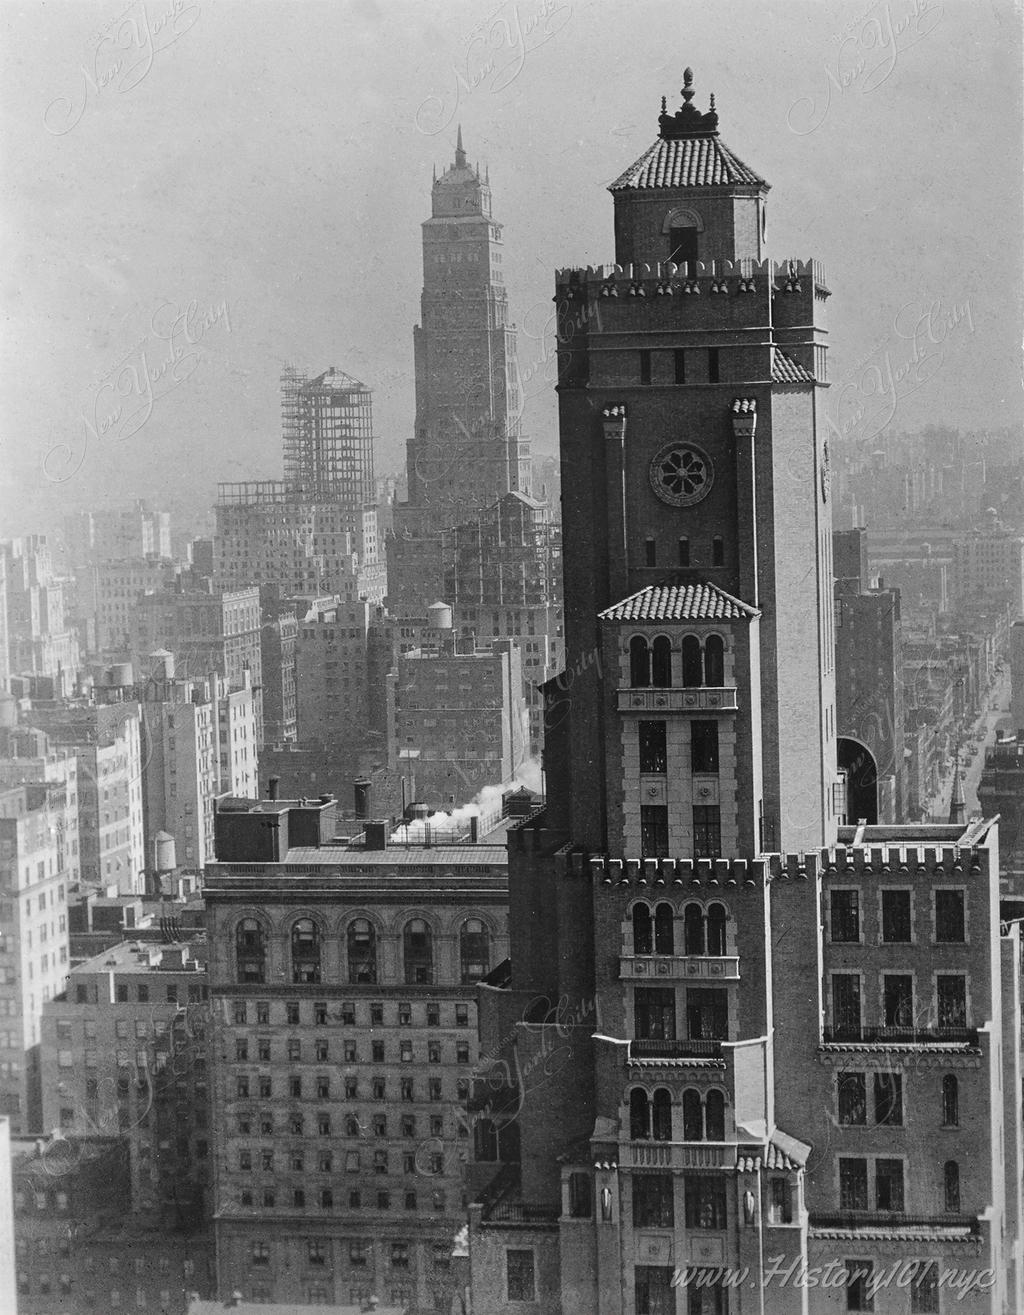 Photograph taken from The Shelton Hotel (James T. Lee) of the The Ritz Tower & Hotel Beverly (Emery Roth)